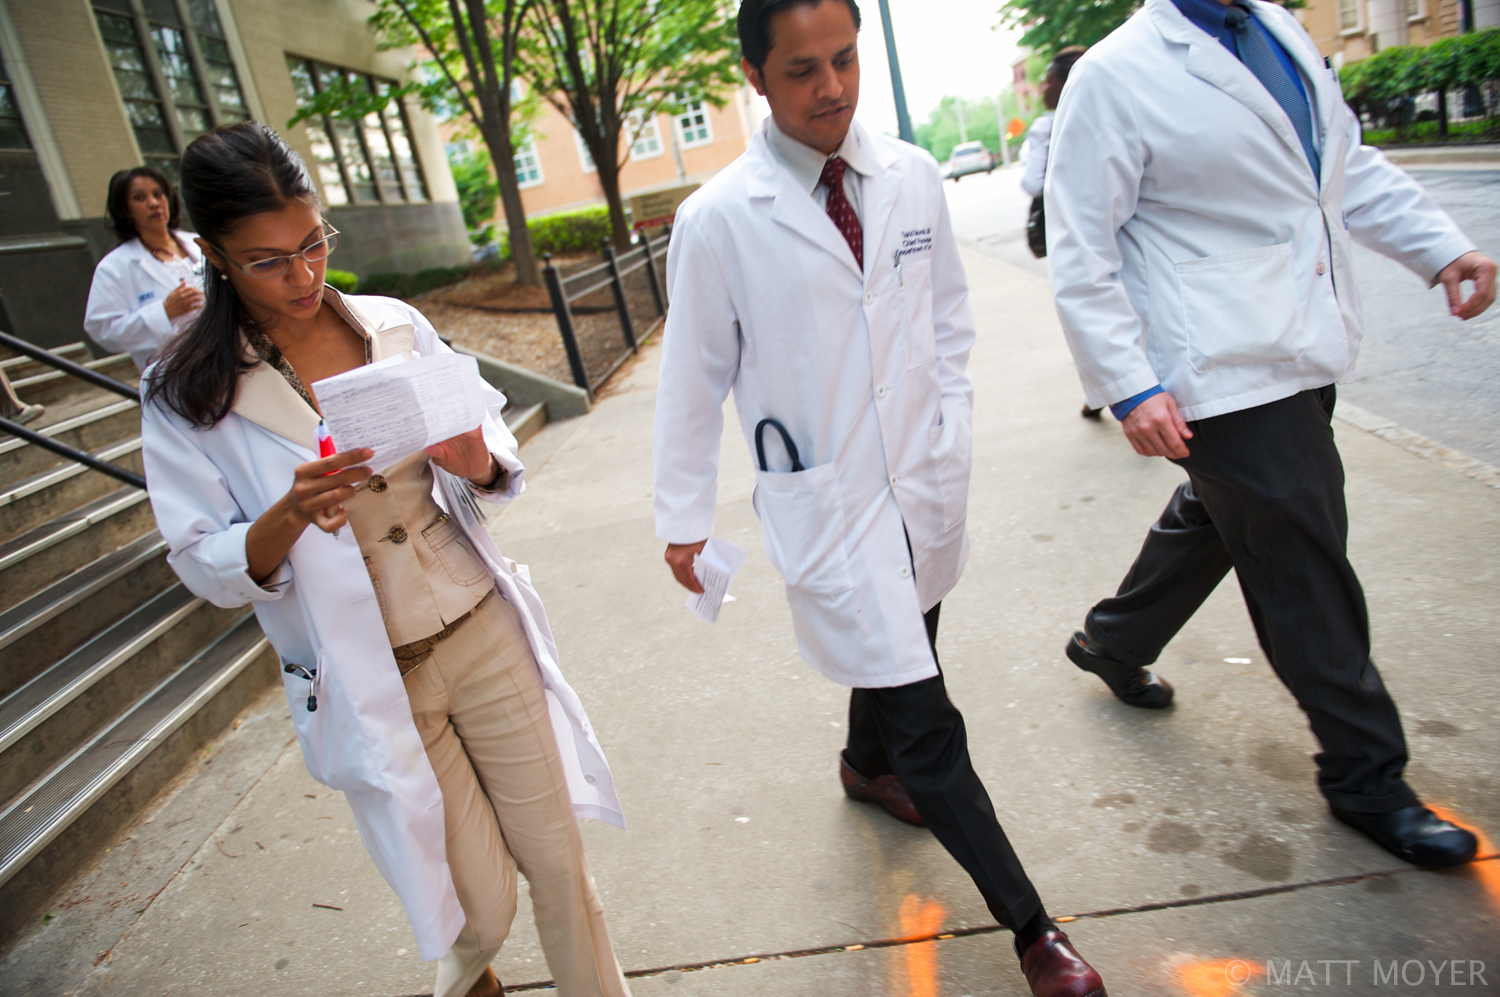  Dr. Carla Haack, left, a twenty five-year-old surgical resident, walks with colleagues outside Grady Memorial Hospital. 